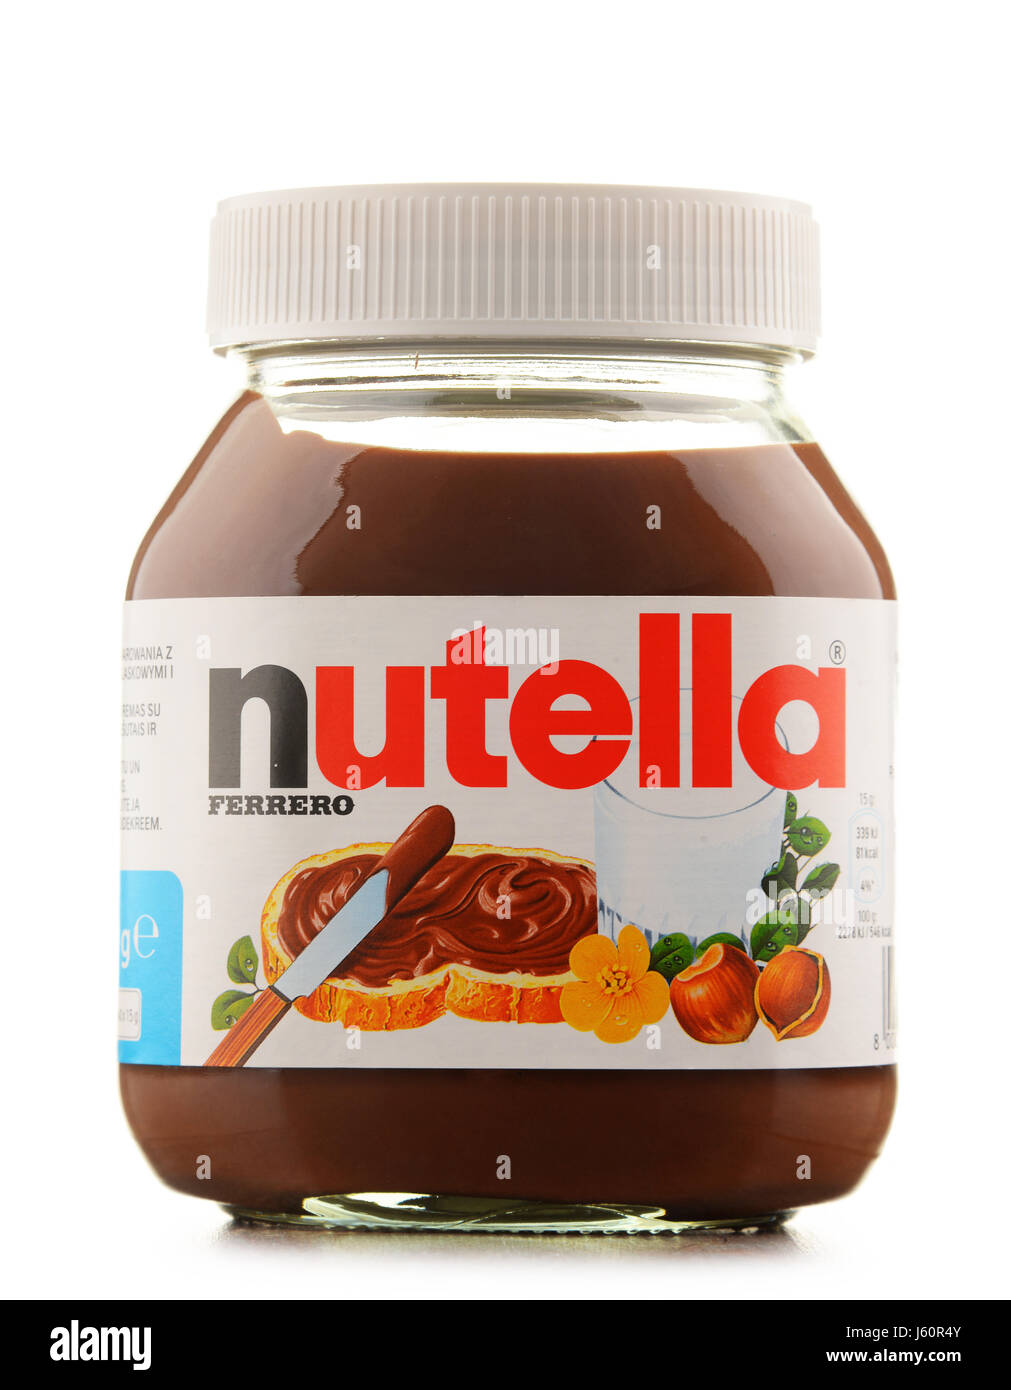 POZNAN, POLAND - OCT 11, 2016: Introduced to the market in 1964 by Italian company Ferrero, Nutella is widely popular brand name of a sweetened hazeln Stock Photo